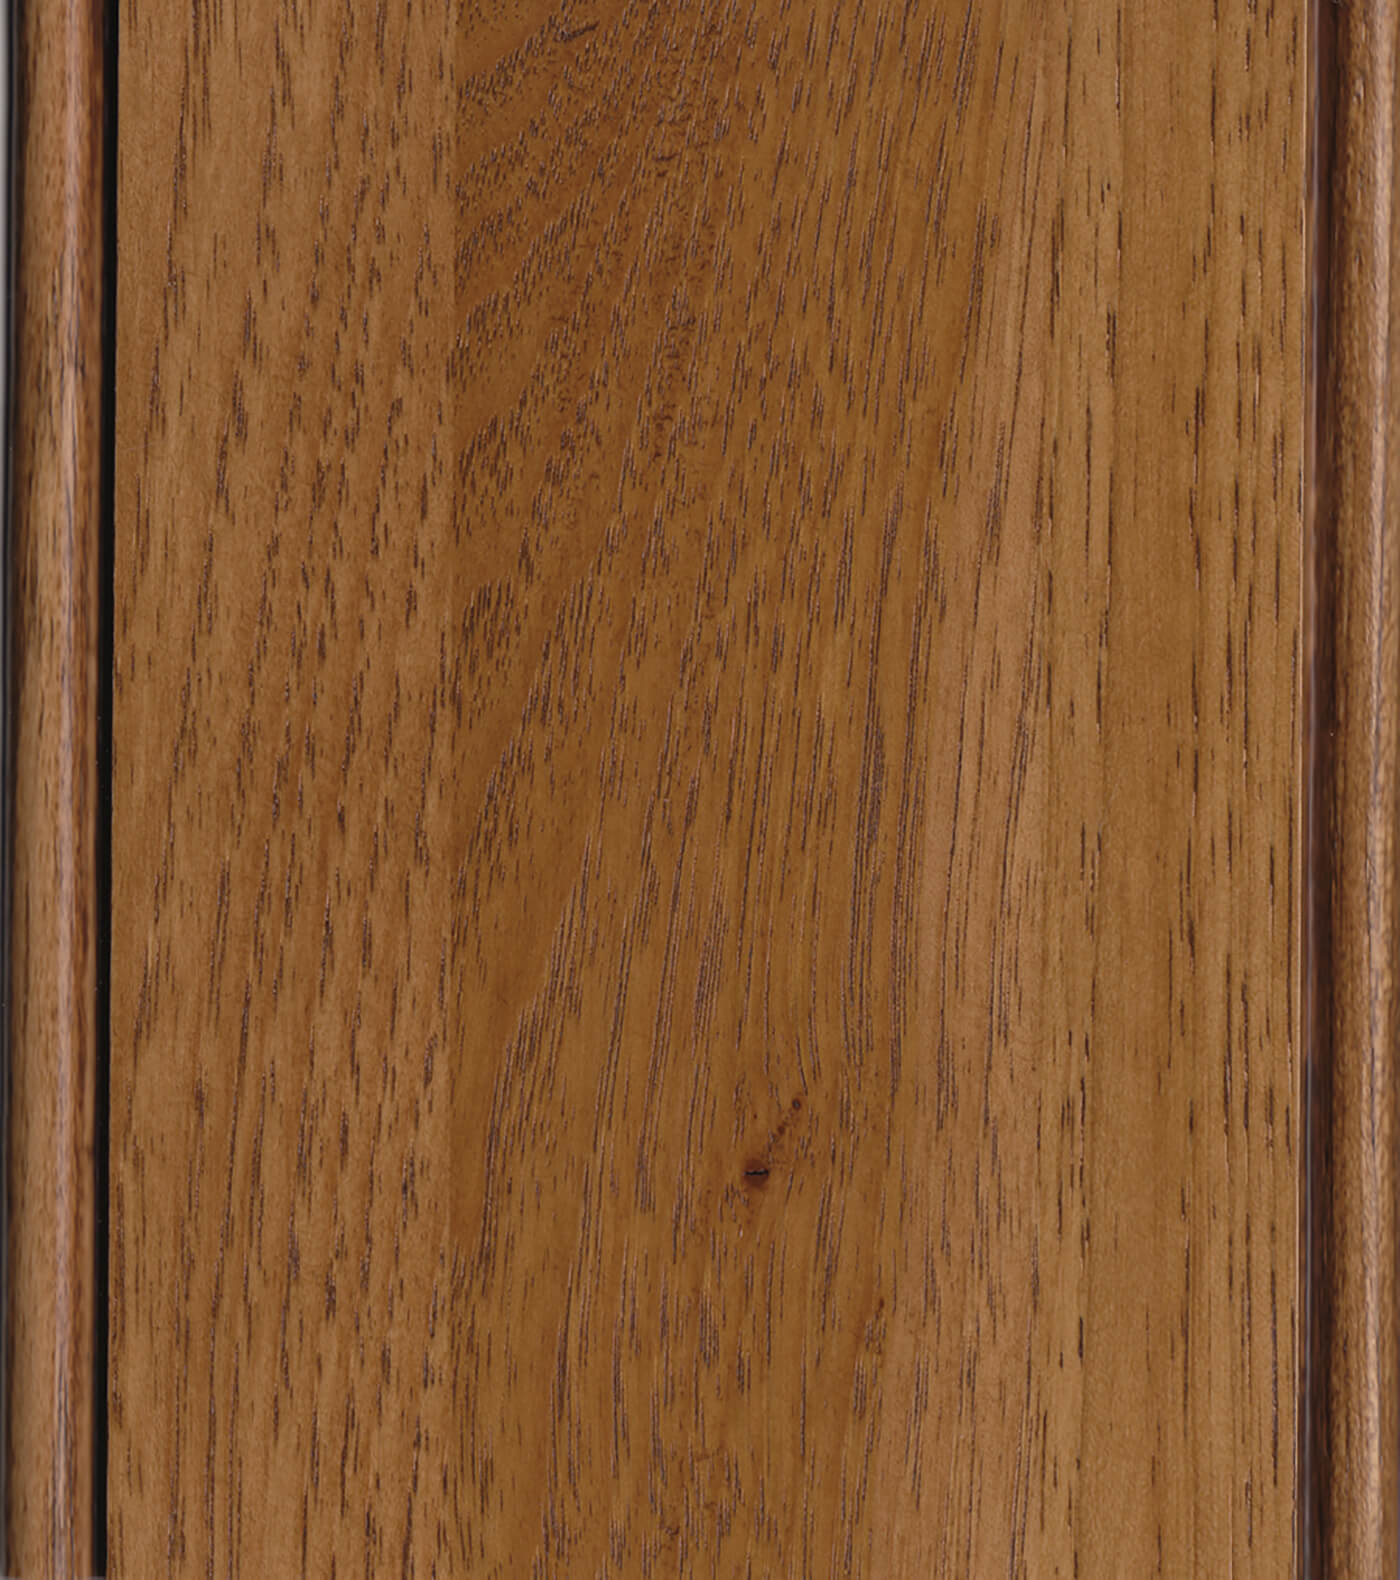 Clove Stain on Hickory or Rustic Hickory